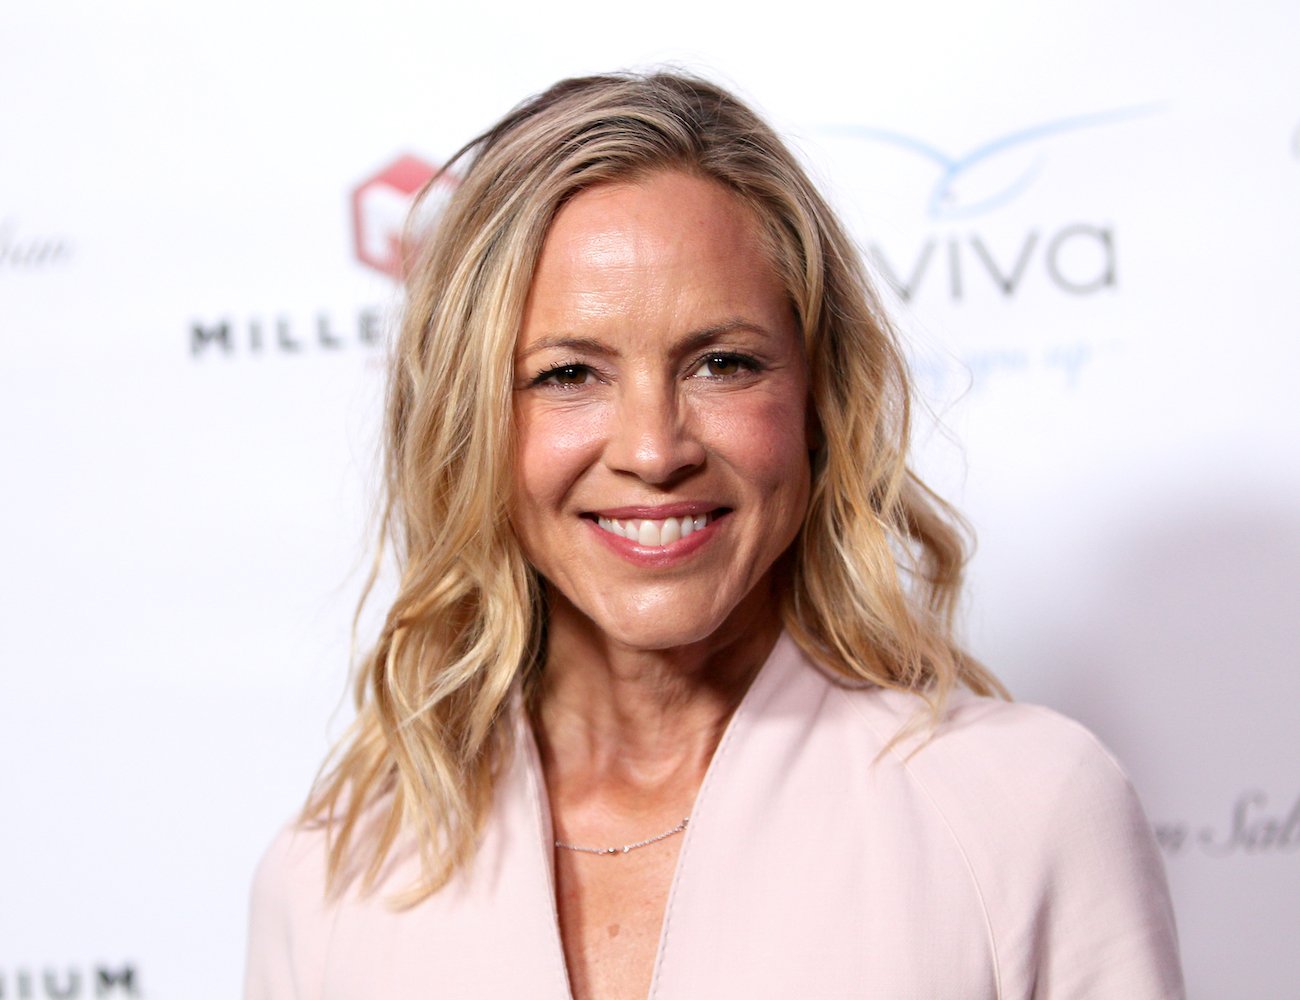 ‘NCIS’ Star Maria Bello to Appear in Upcoming Drama With Major A-Listers Attached